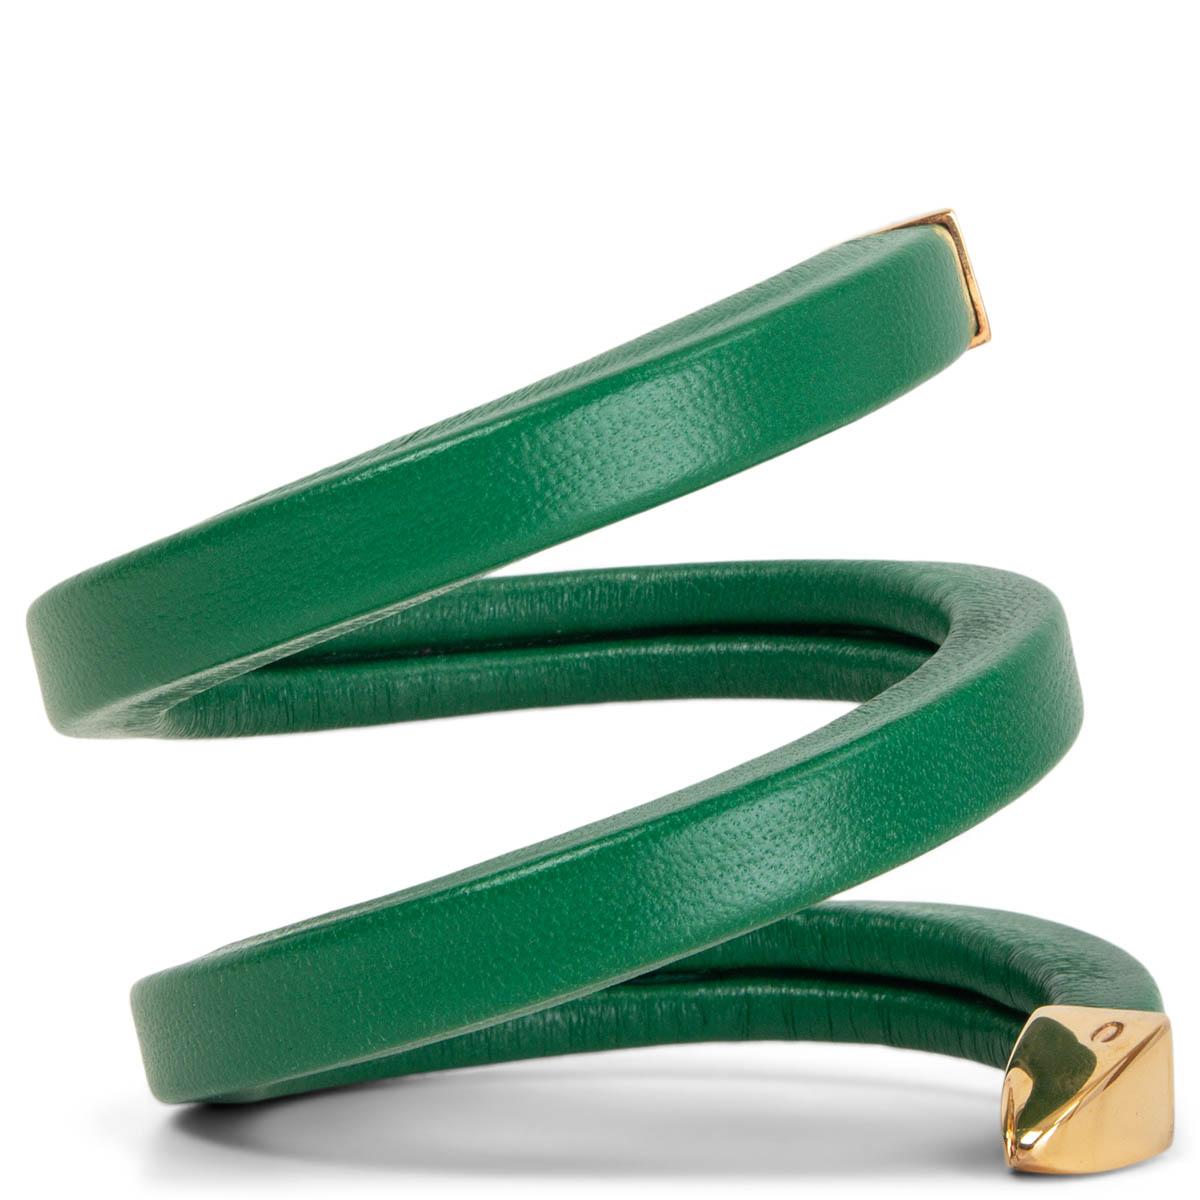 100% authentic Bottega Veneta cuff bracelet in green lamb leather that will sit softly against your skin, this wrap-around style is tipped on both ends with gold-plated sterling silver. Brand new. Comes with dust bag. 

Measurements
Depth	1cm